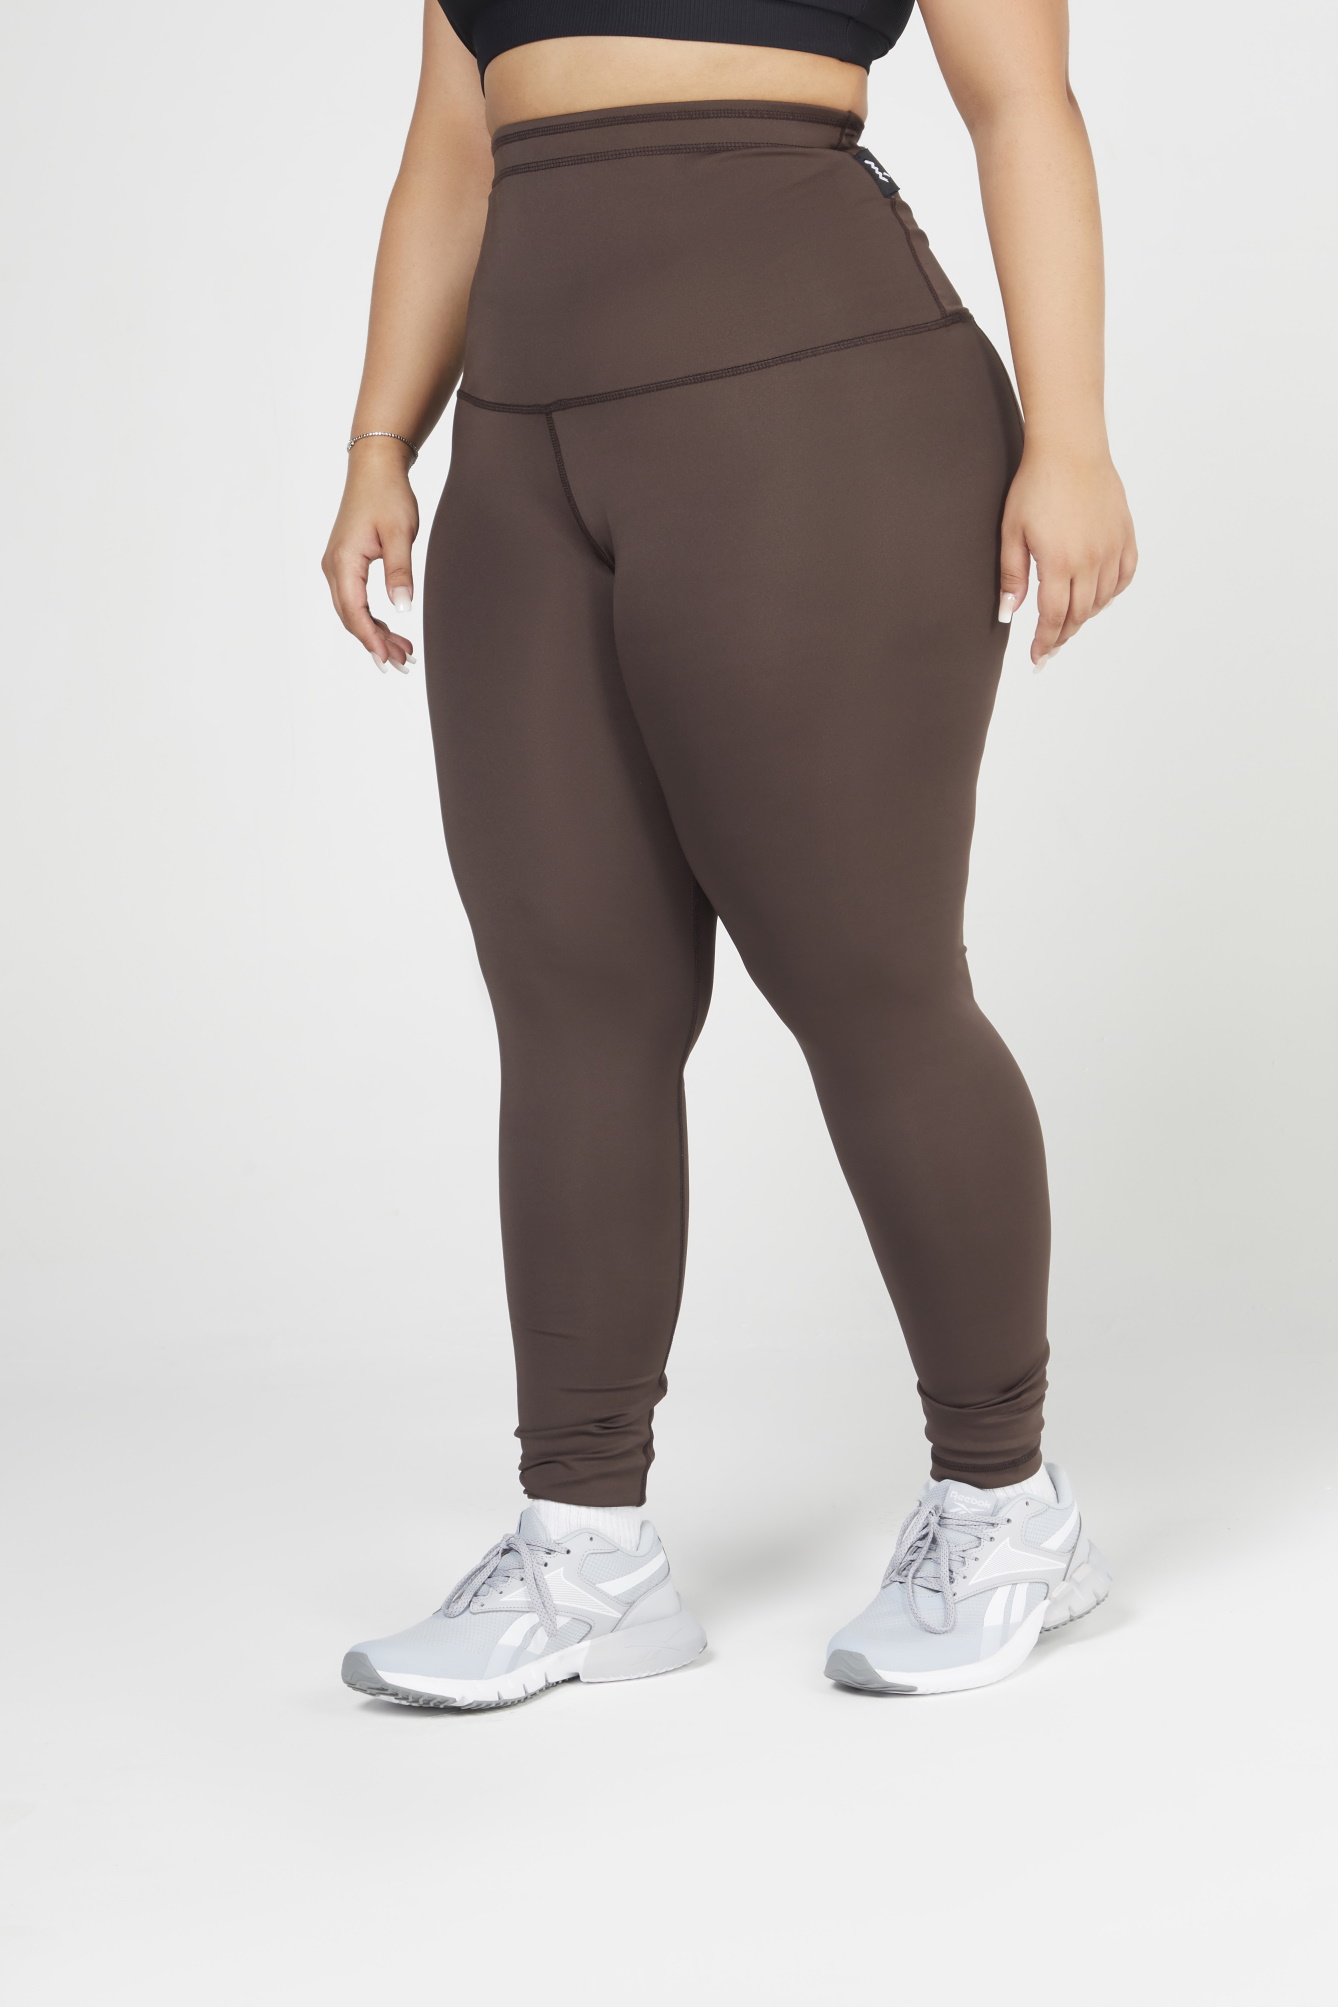 Classy Lady (Brown) - Extra High Waist Plus Size Leggings